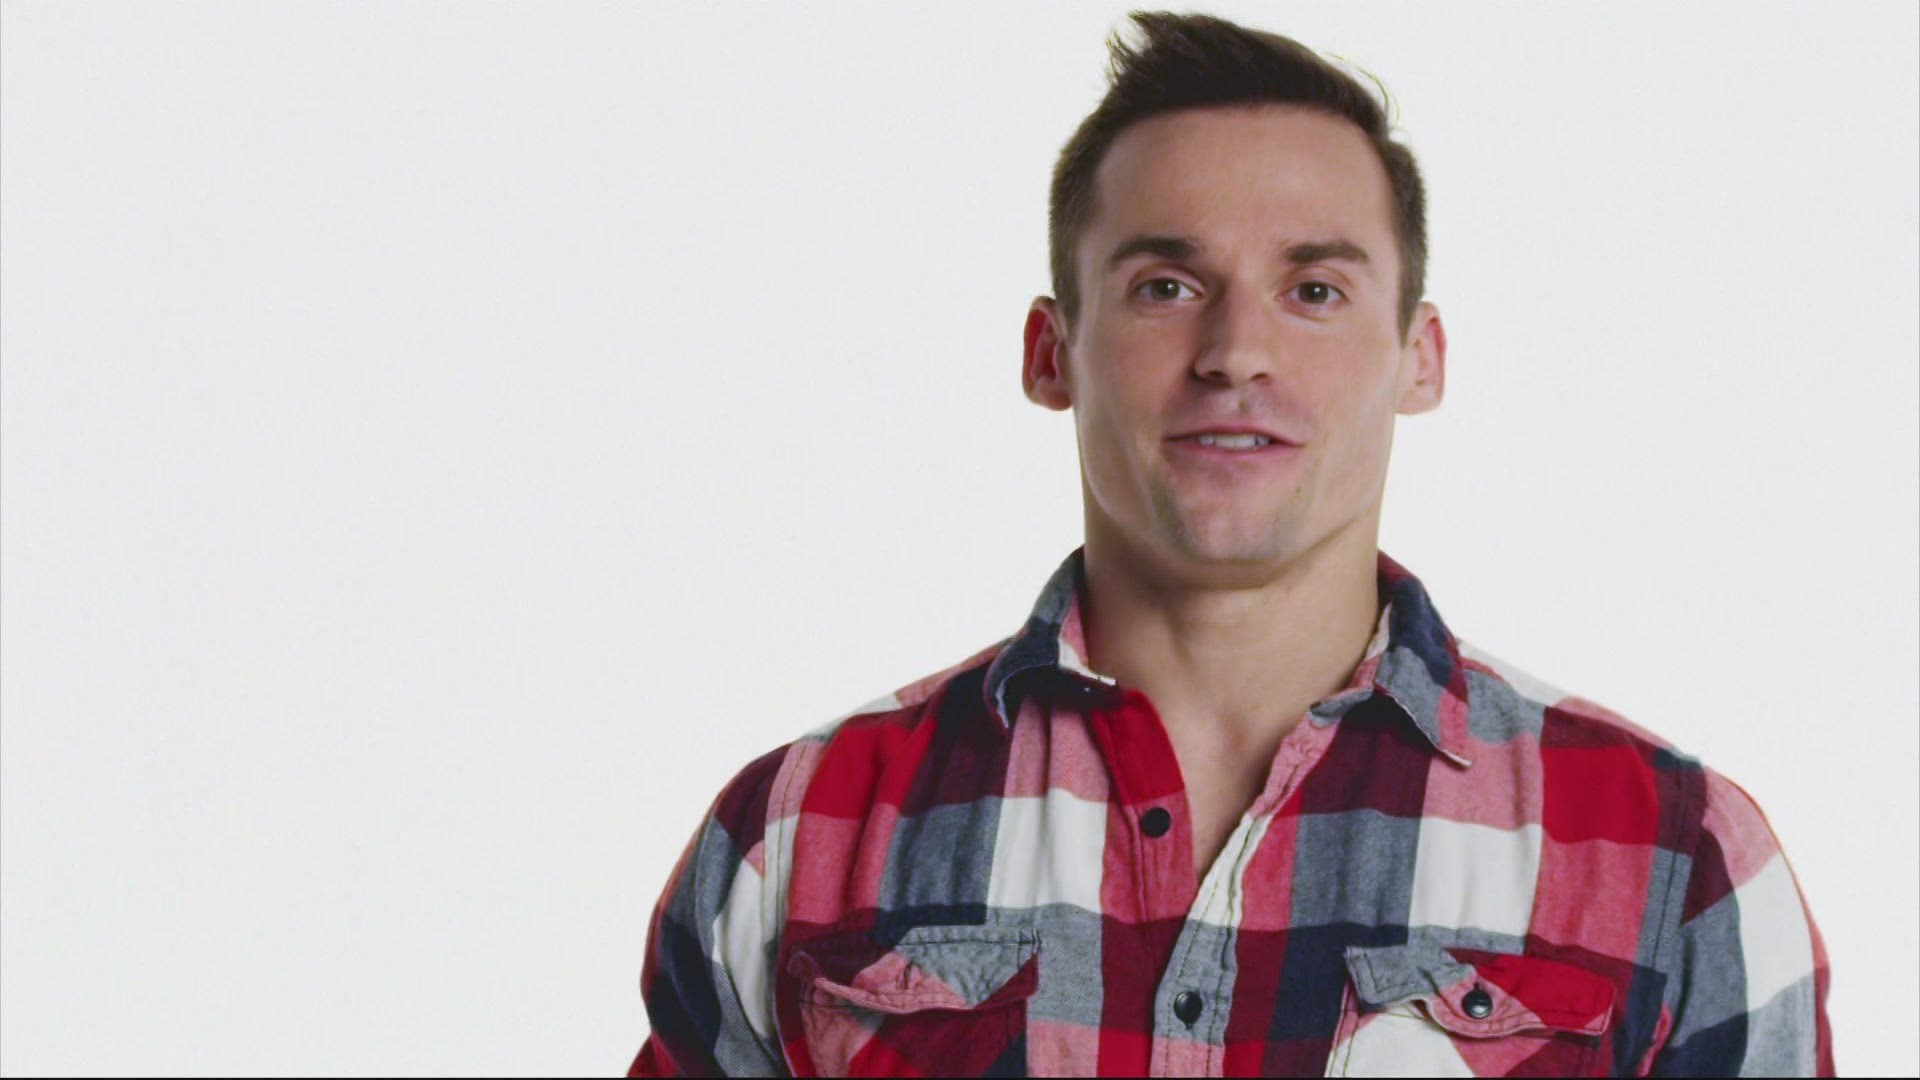 Sam Mikulak is a gymnast making another Olympic appearance, and he has a very special connection to WCNC Charlotte!